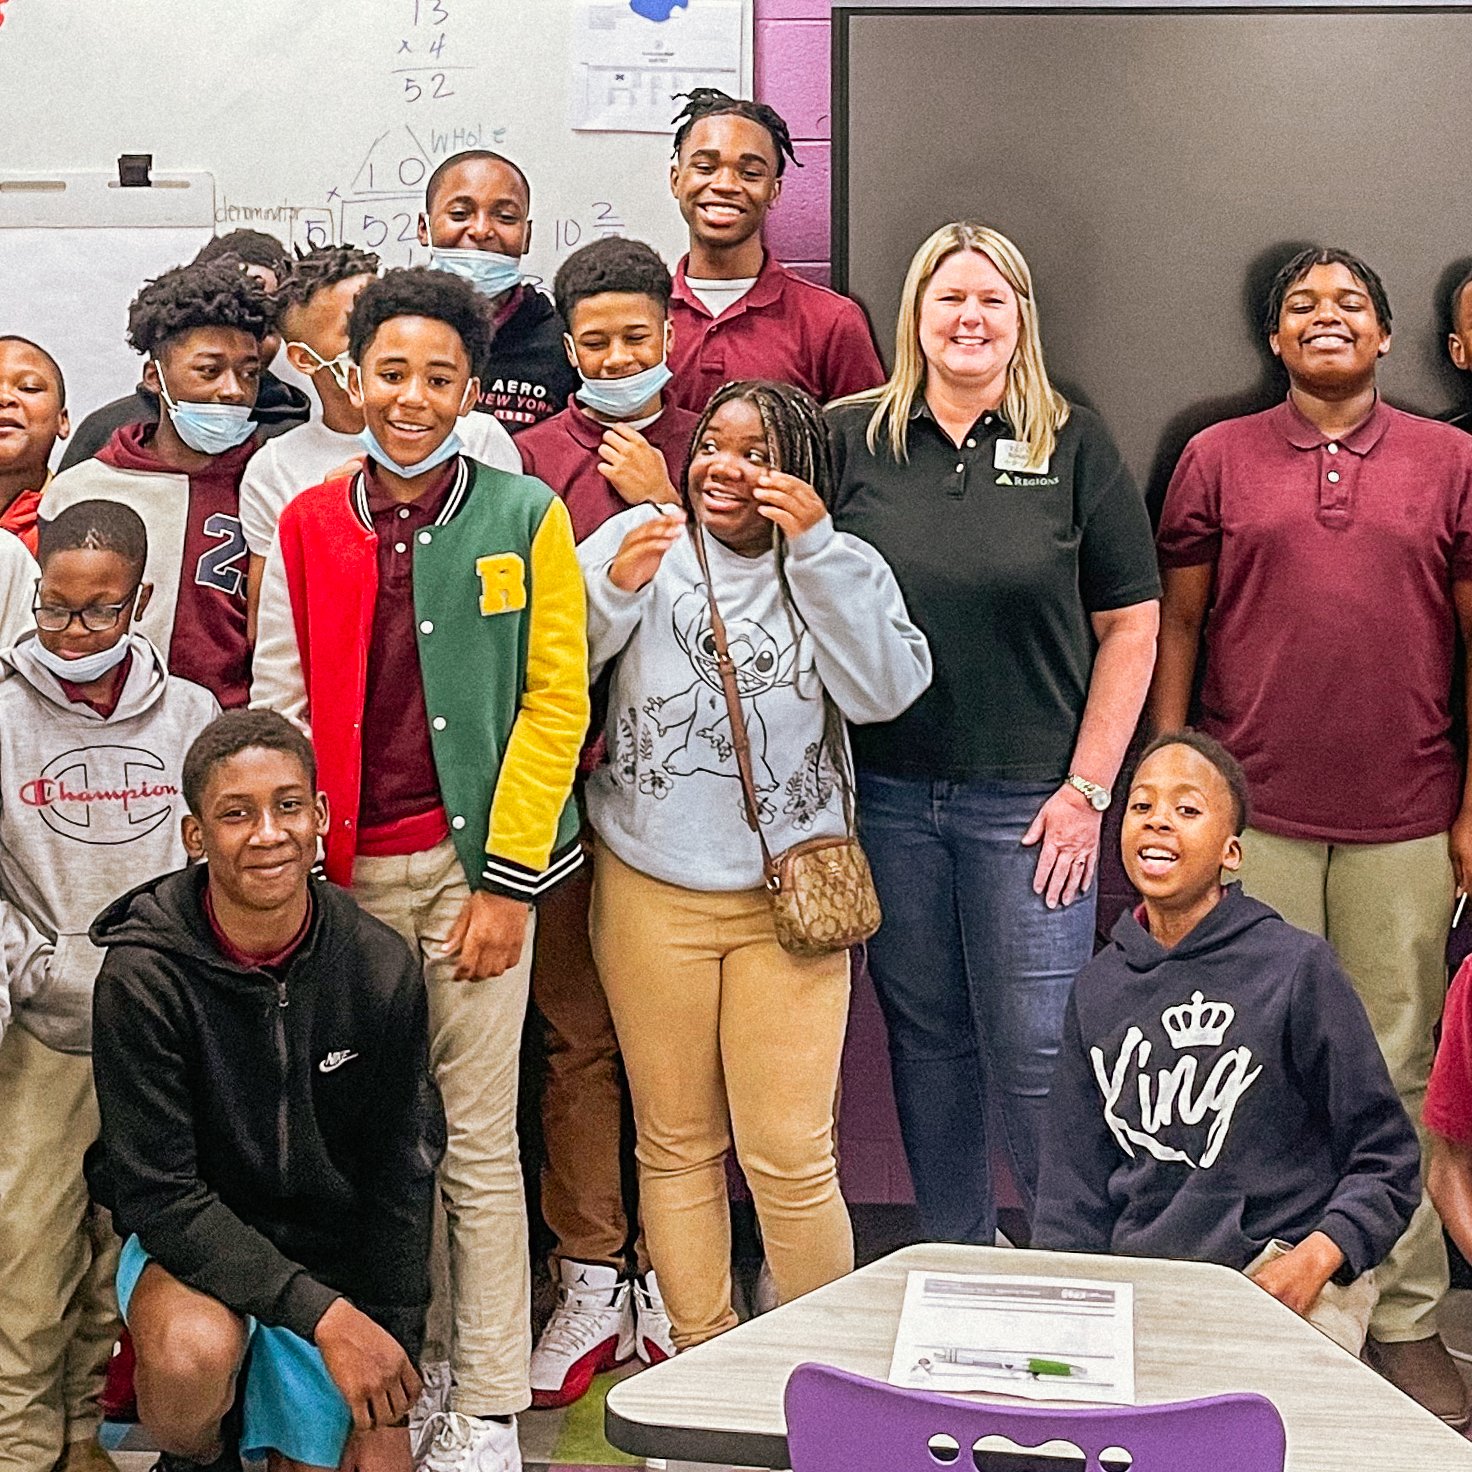 💳 Financial literacy matters! Tanya Rodgers, Regions Bank Branch Manager, visited our Lexington Club during Financial Literacy month to discuss important topics like savings accounts, identity theft, and building credit. 

Ready to empower your chil